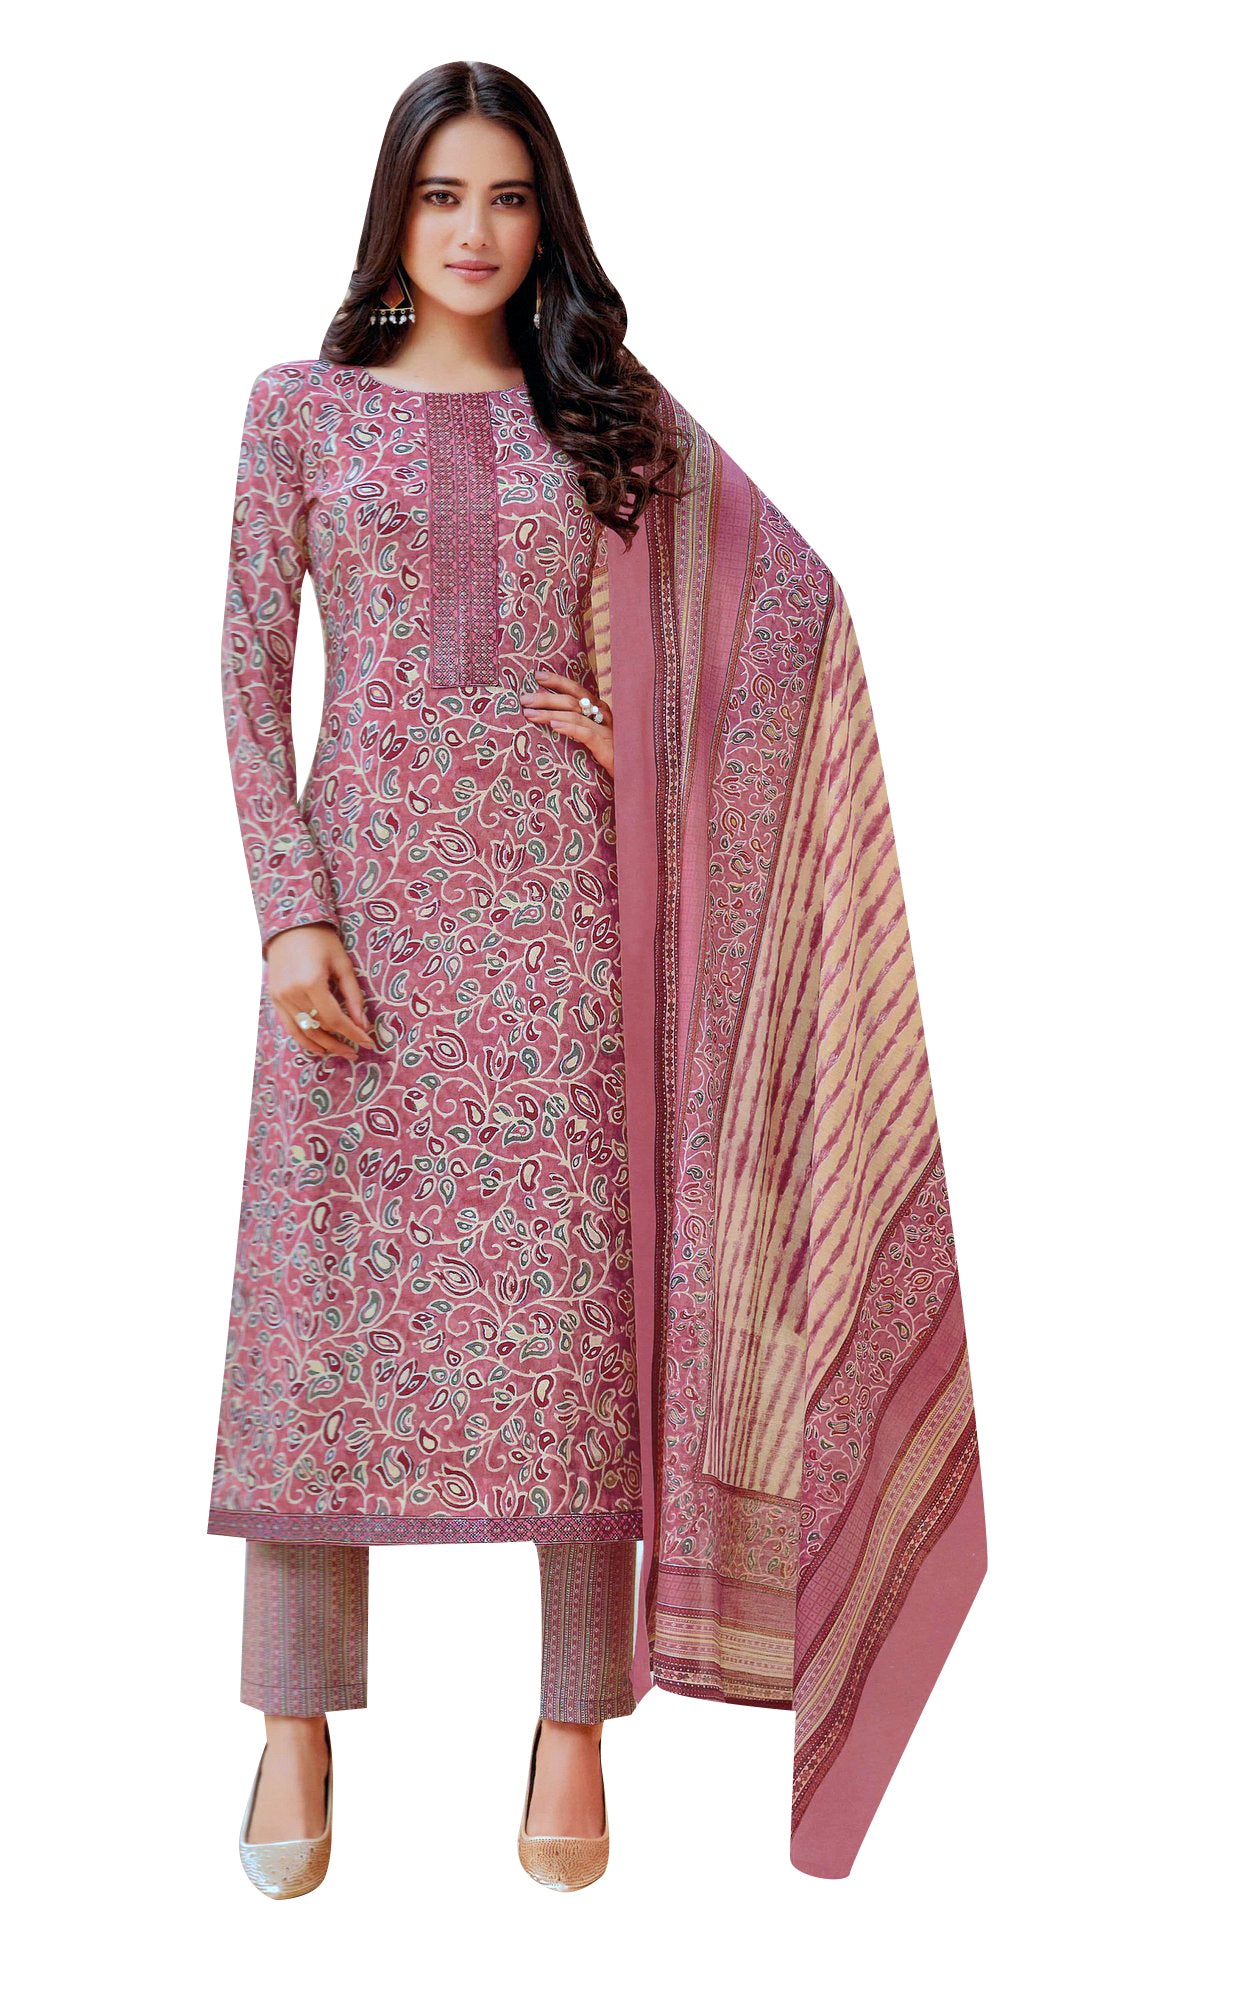 Buy Pant Salwar Suit online From Ethnic Plus For Best Price